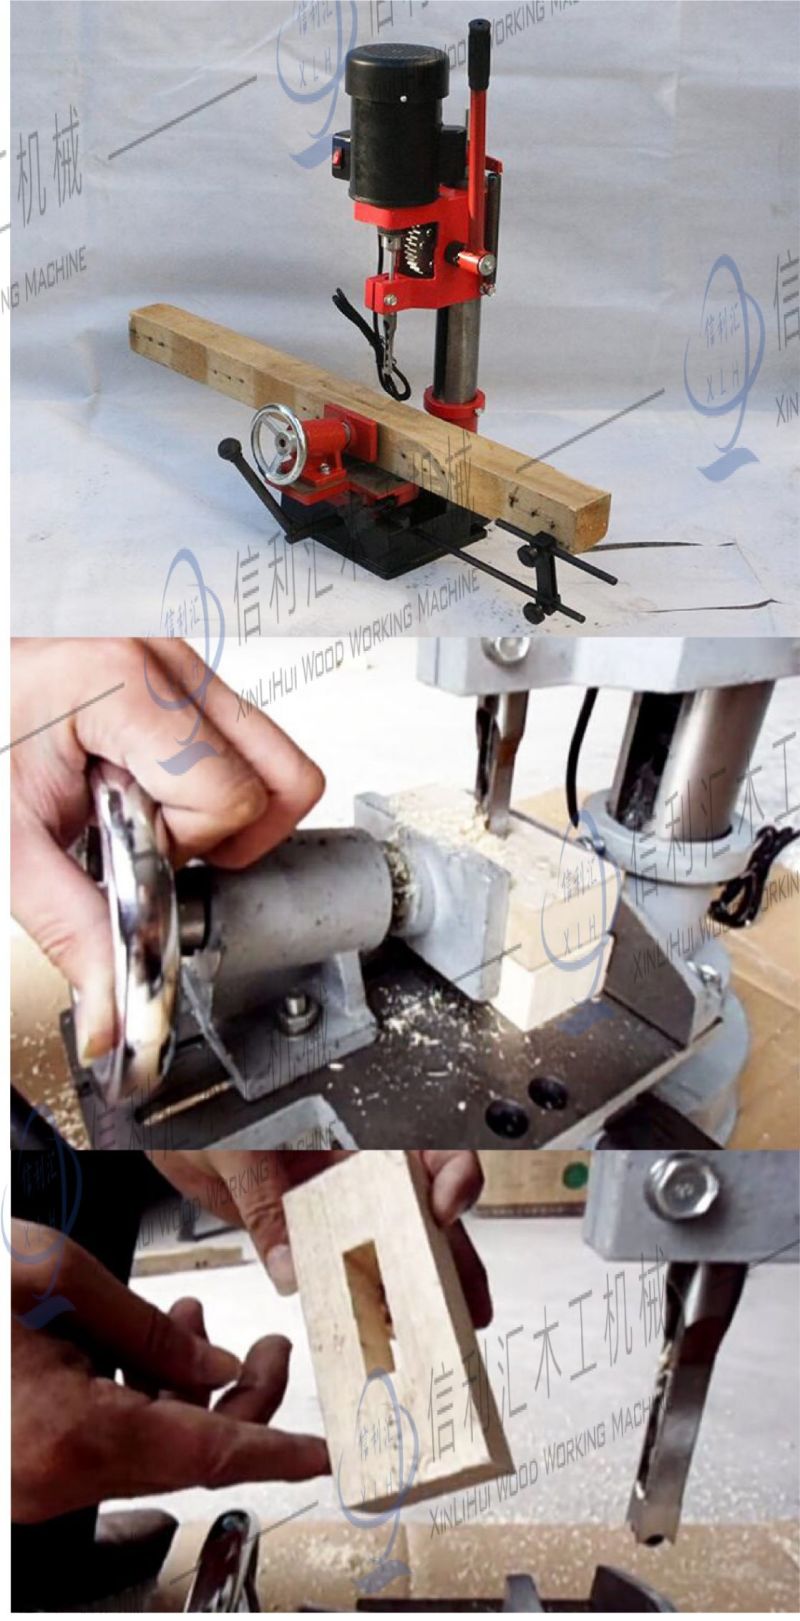 Vertical Woodworking Grooving Machine Square Chisel Grooving Machine Eye-Catching Machine Wood Groove Milling Tenoning Machine for Solid Wood Furniture